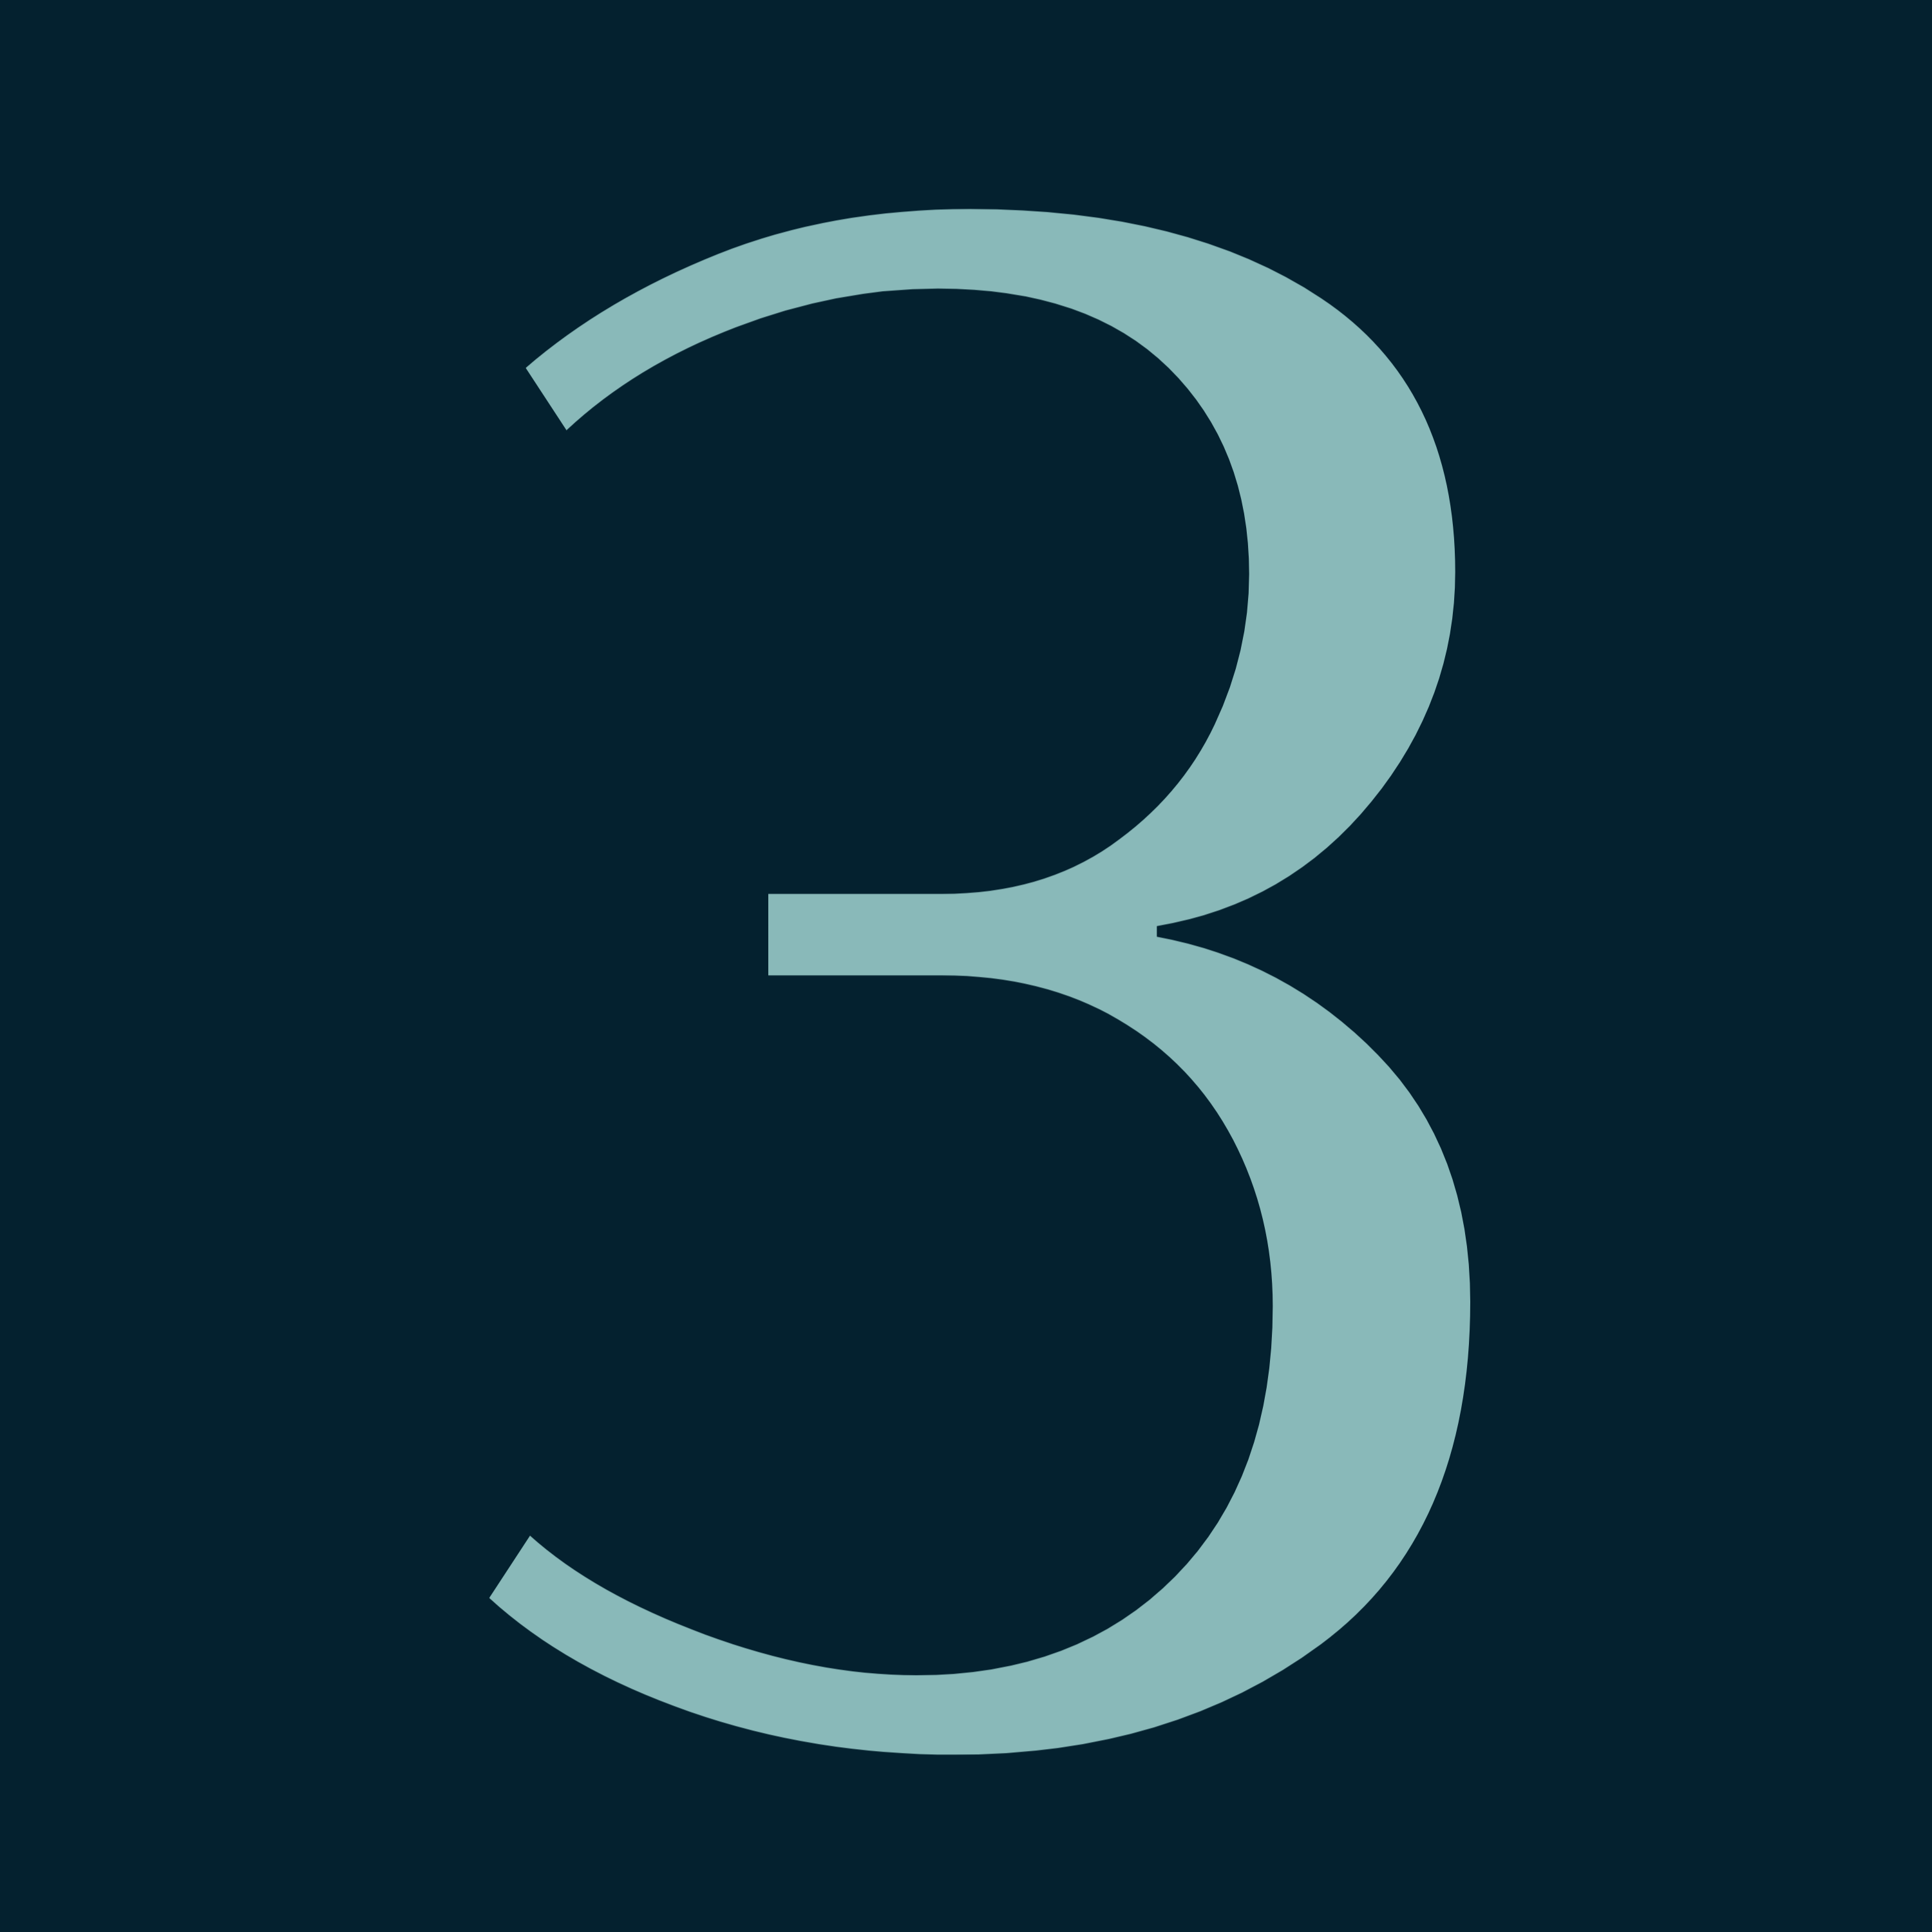 3-Number-PNG